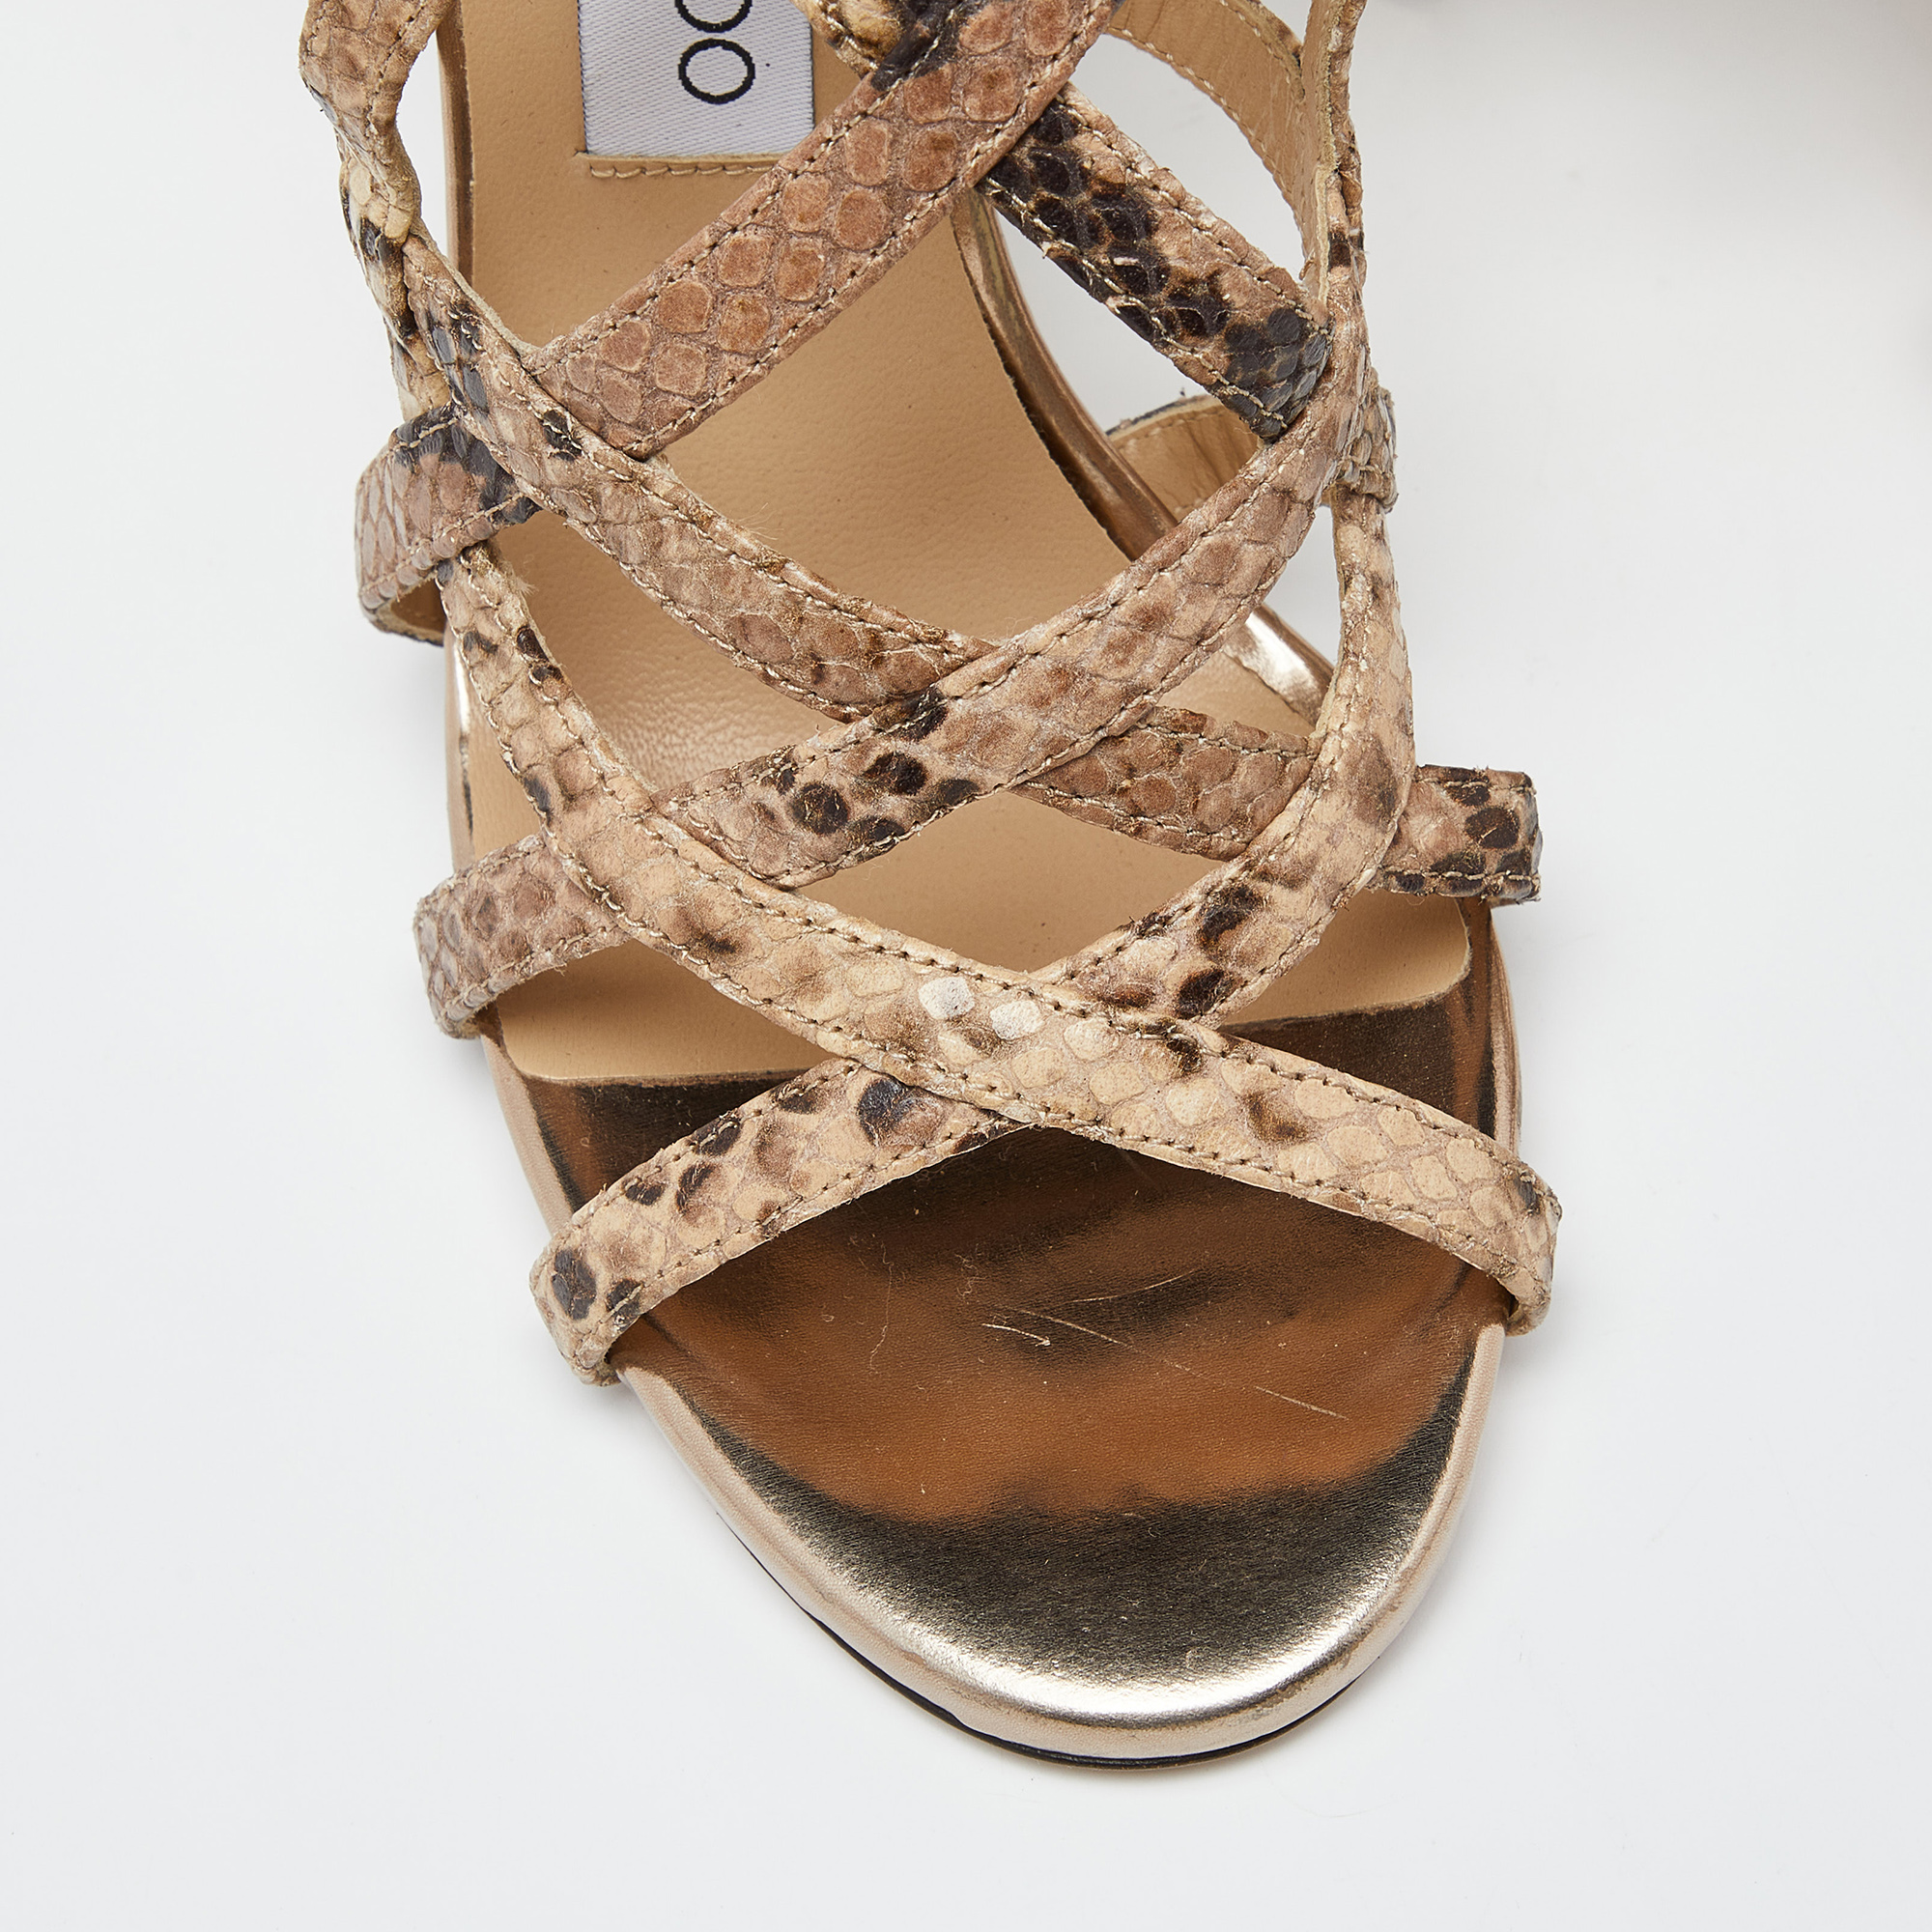 Jimmy Choo Beige Python Embossed Leather Ankle Strap Sandals Size 38